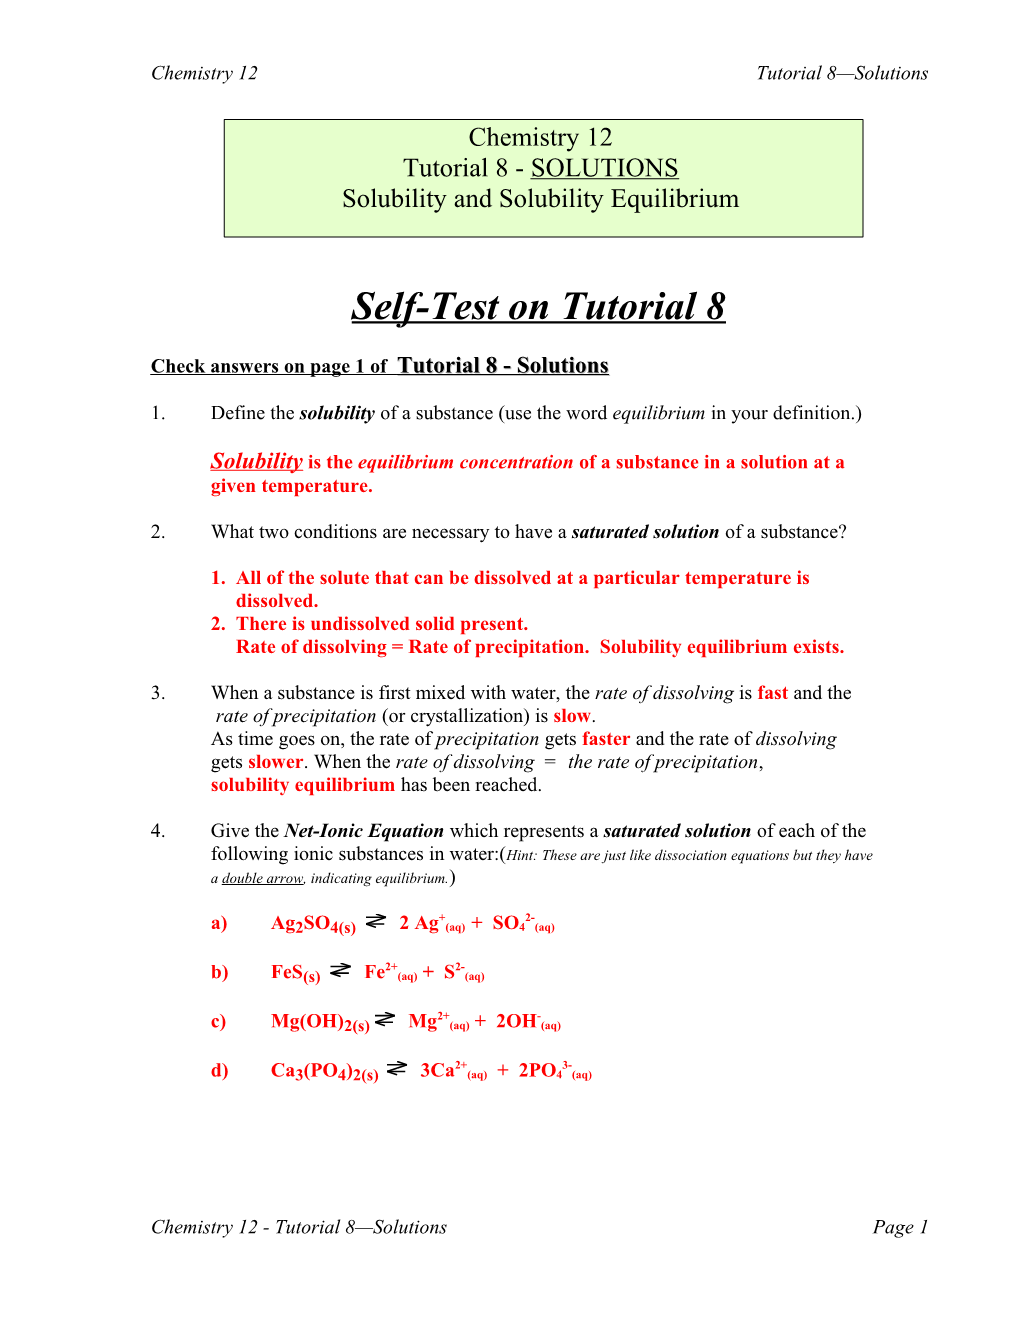 Solubility and Solubility Equilibrium